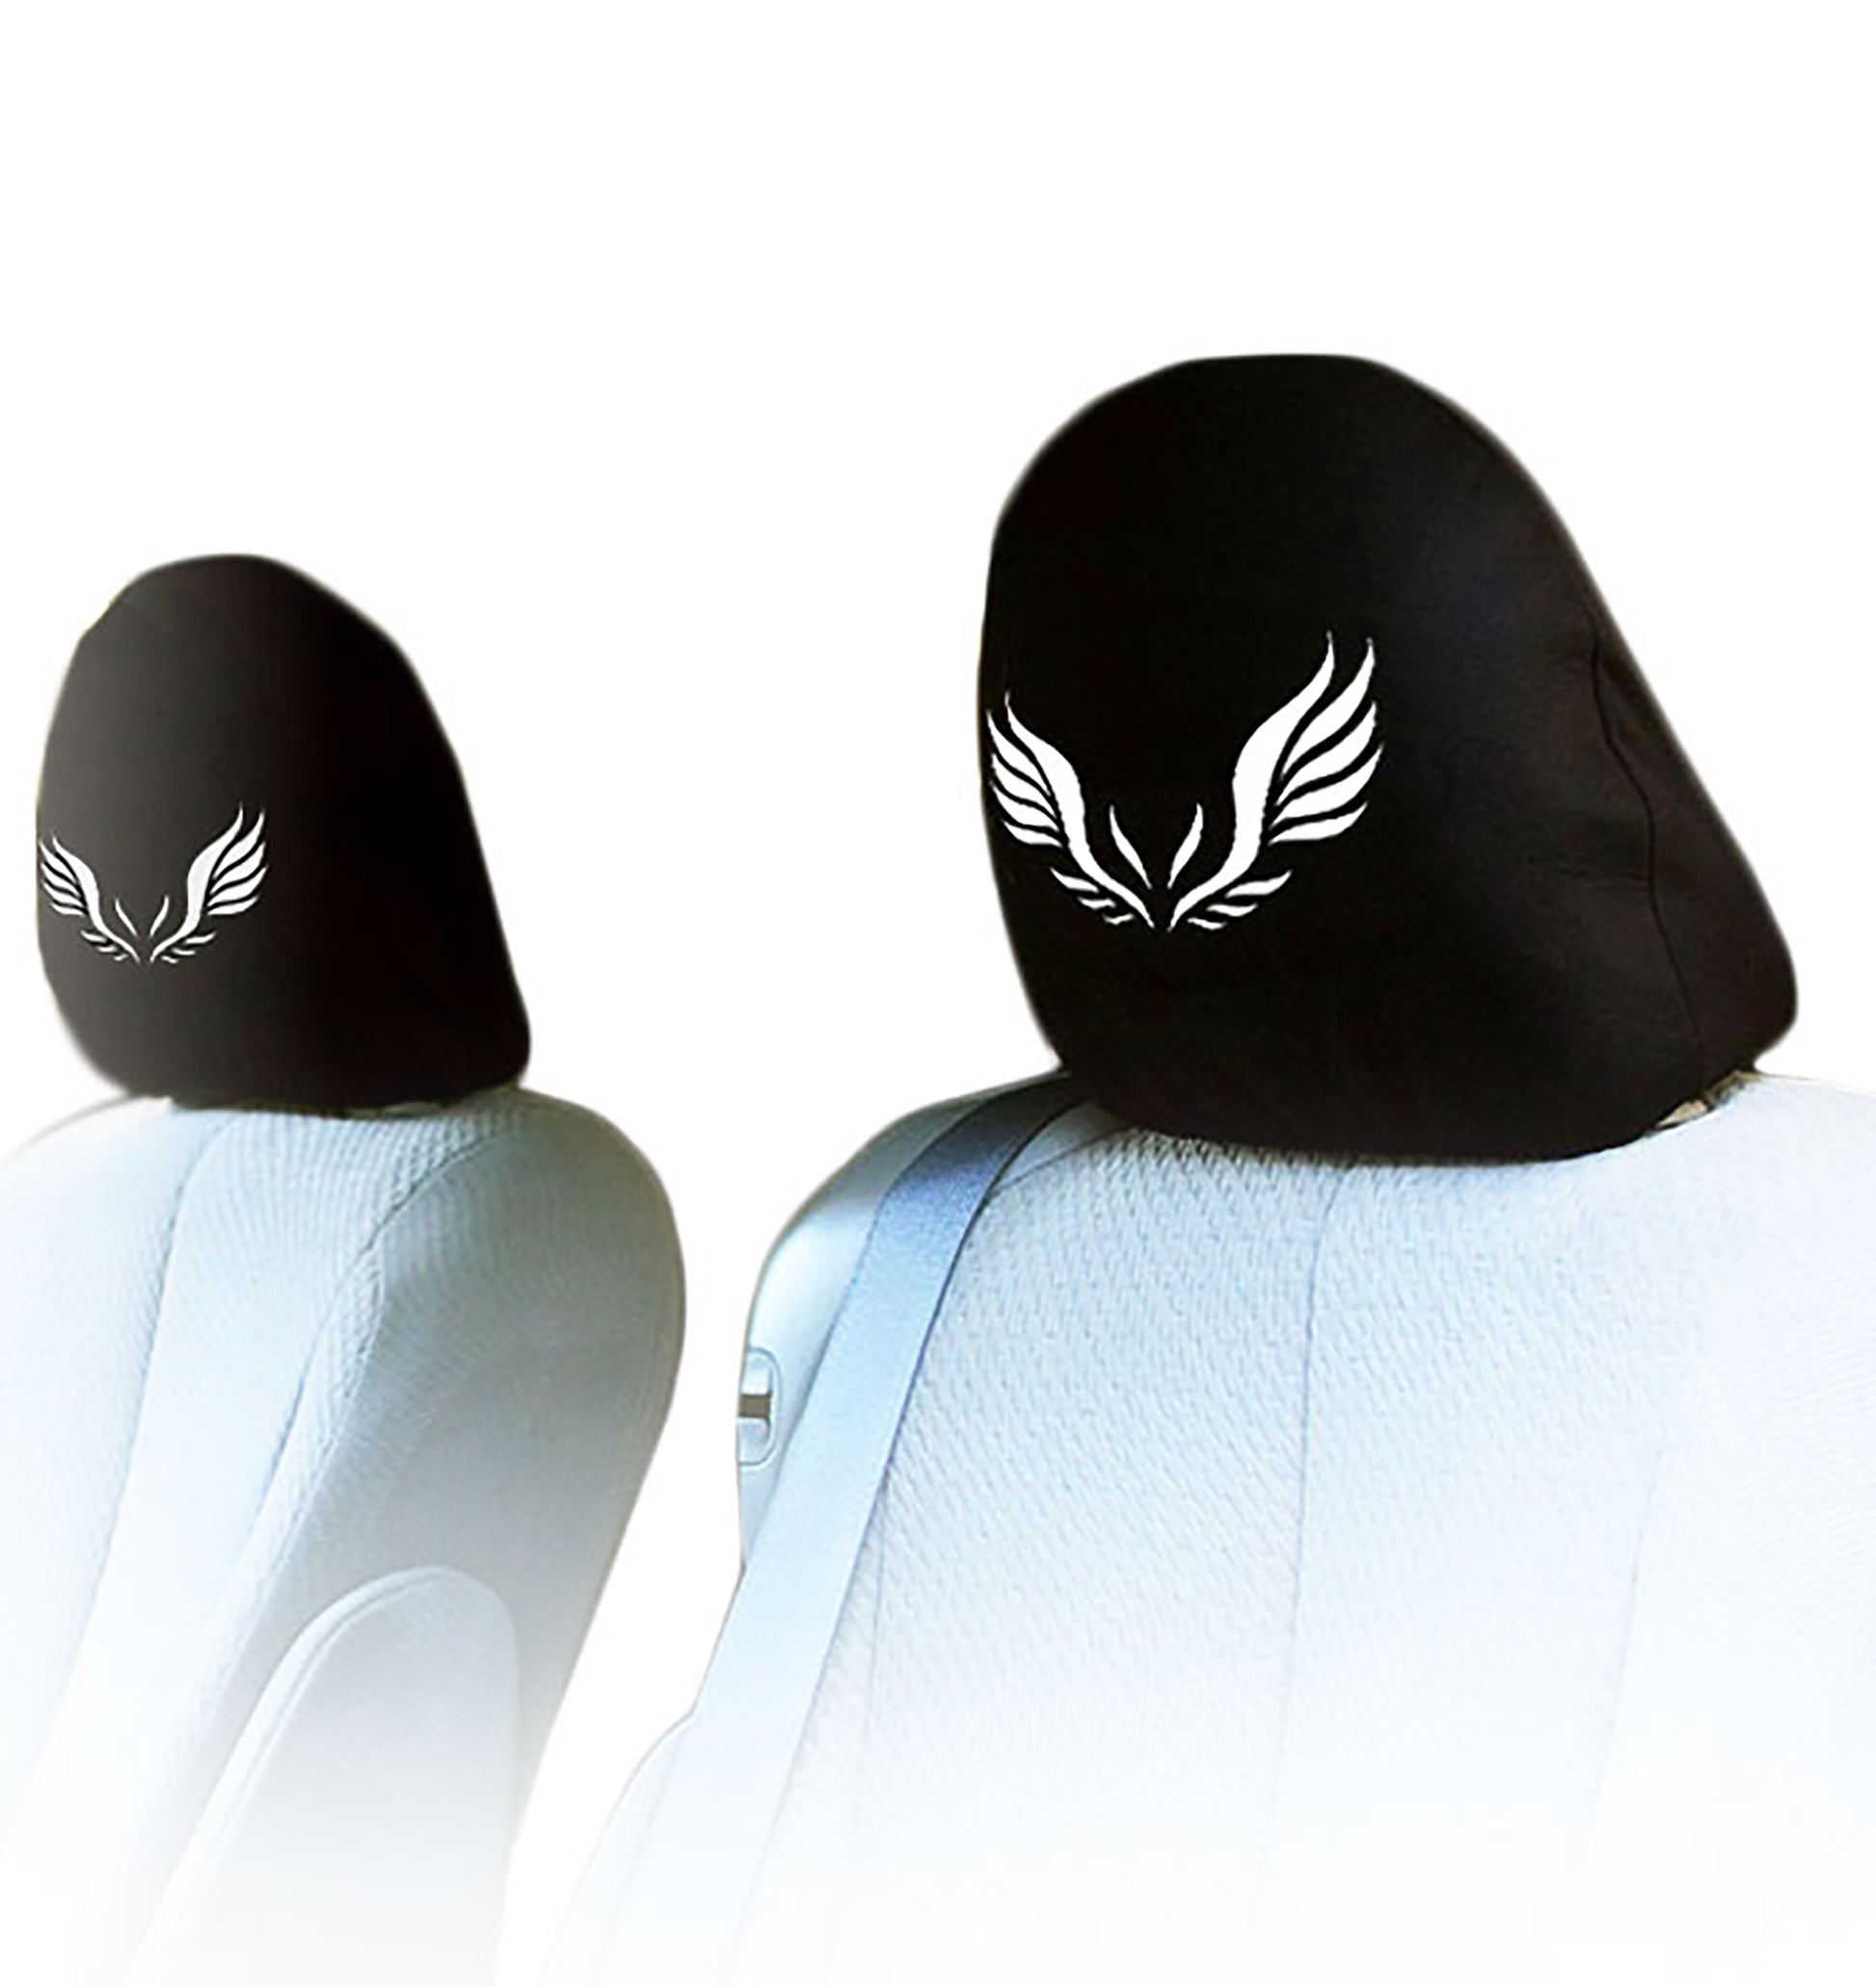 Car headrest covers with embroidery Wing design